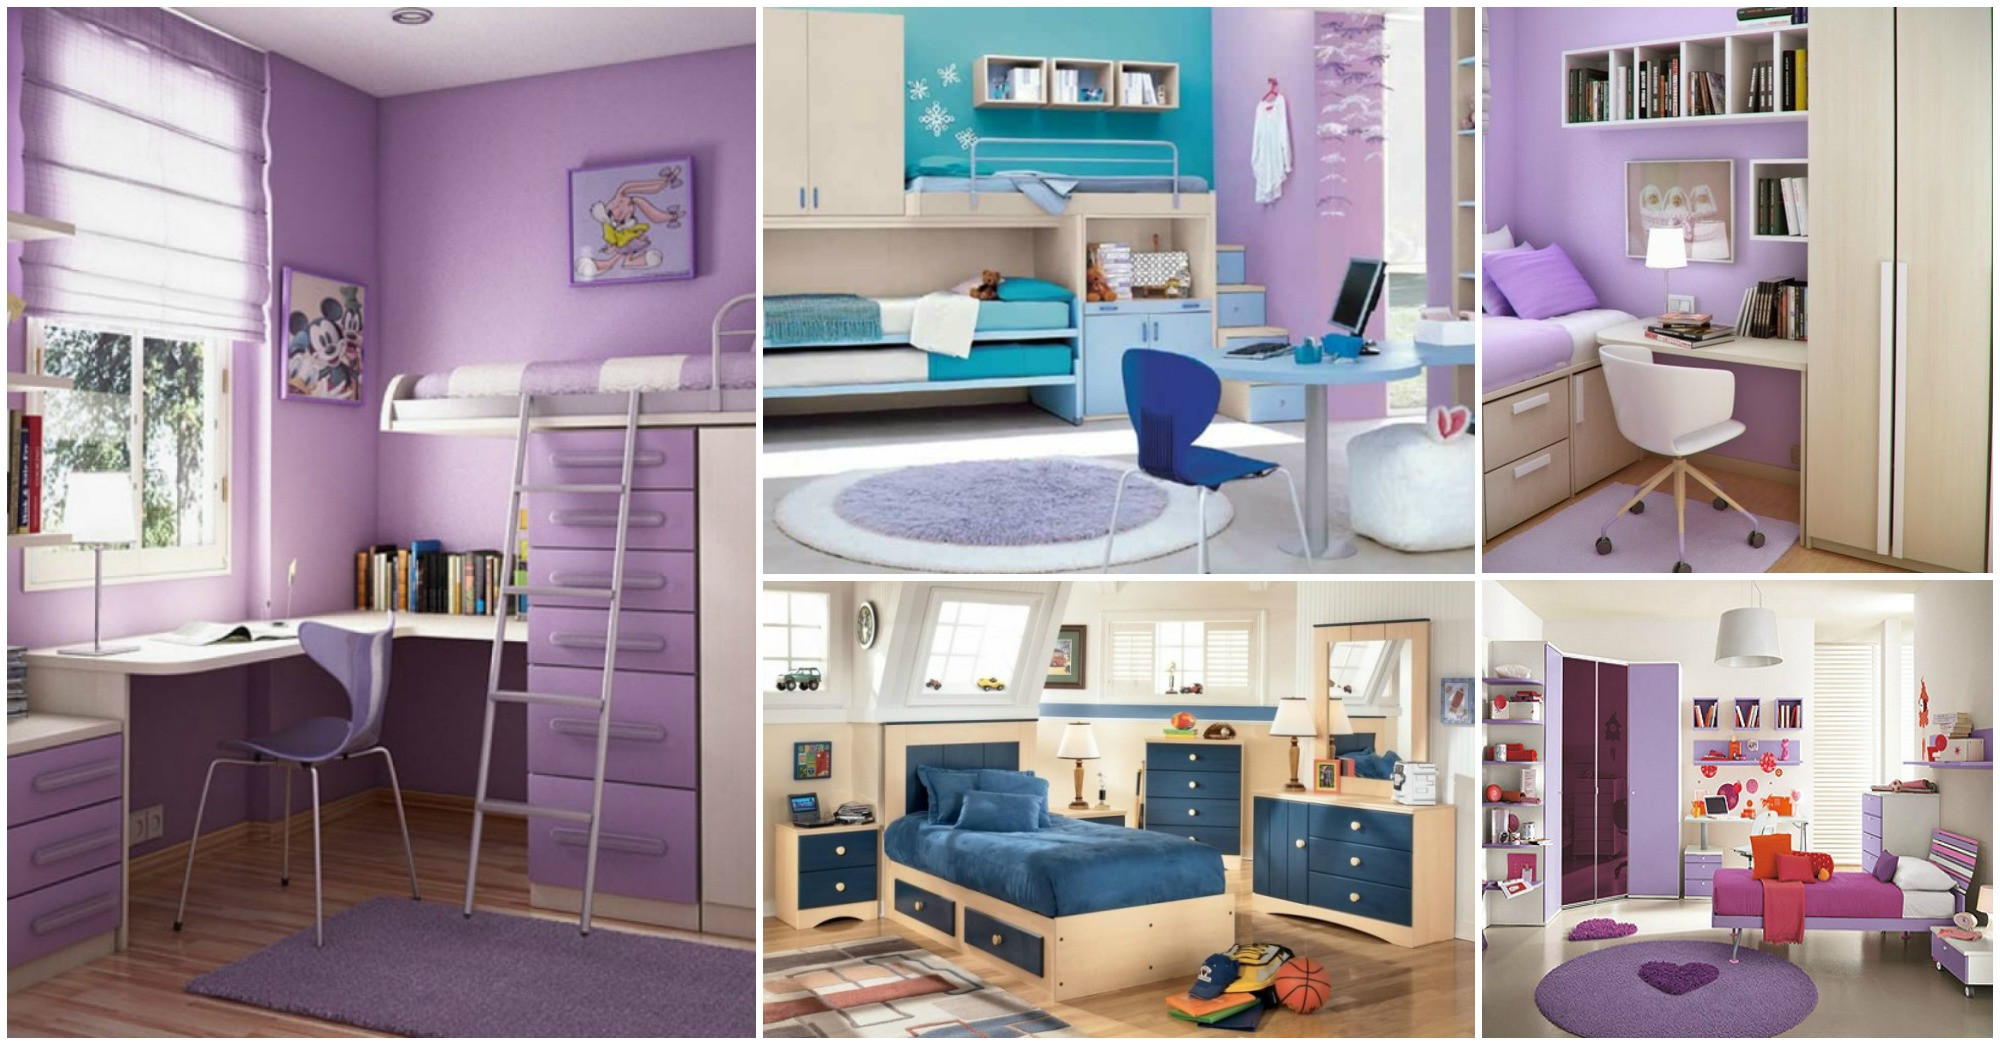 Storage Solutions For Kids Room
 Amazing Storage Solutions For Your Kids Room